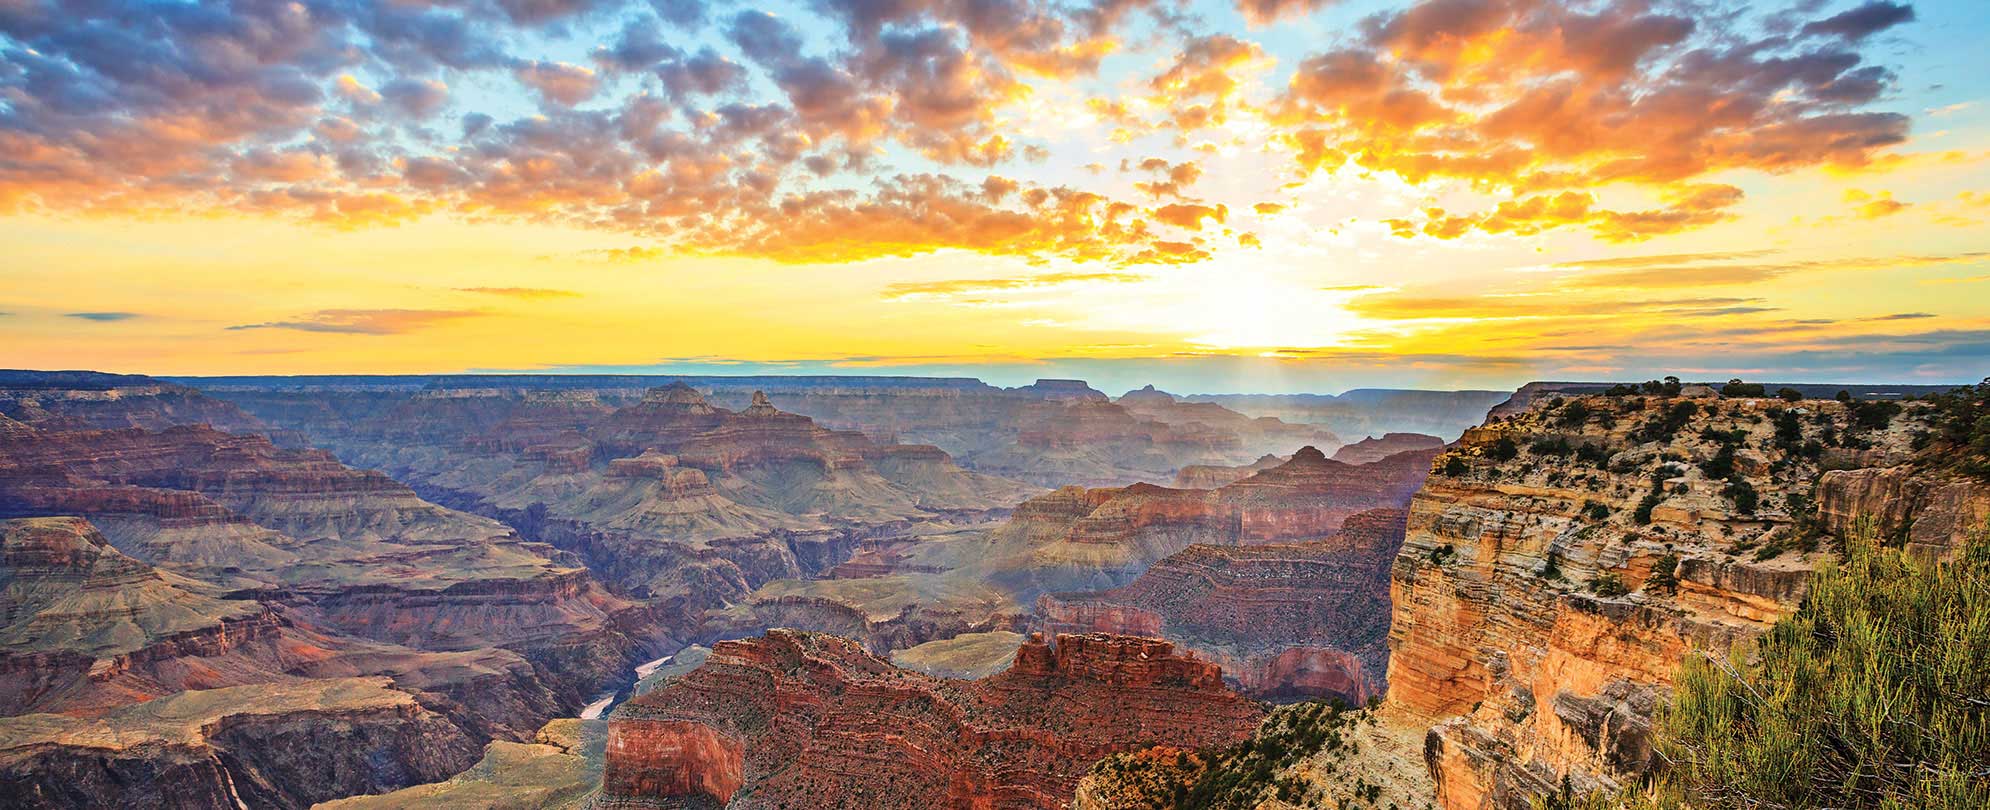 A vibrant yellow and orange sunset over the Grand Canyon in Arizona on a national park vacation